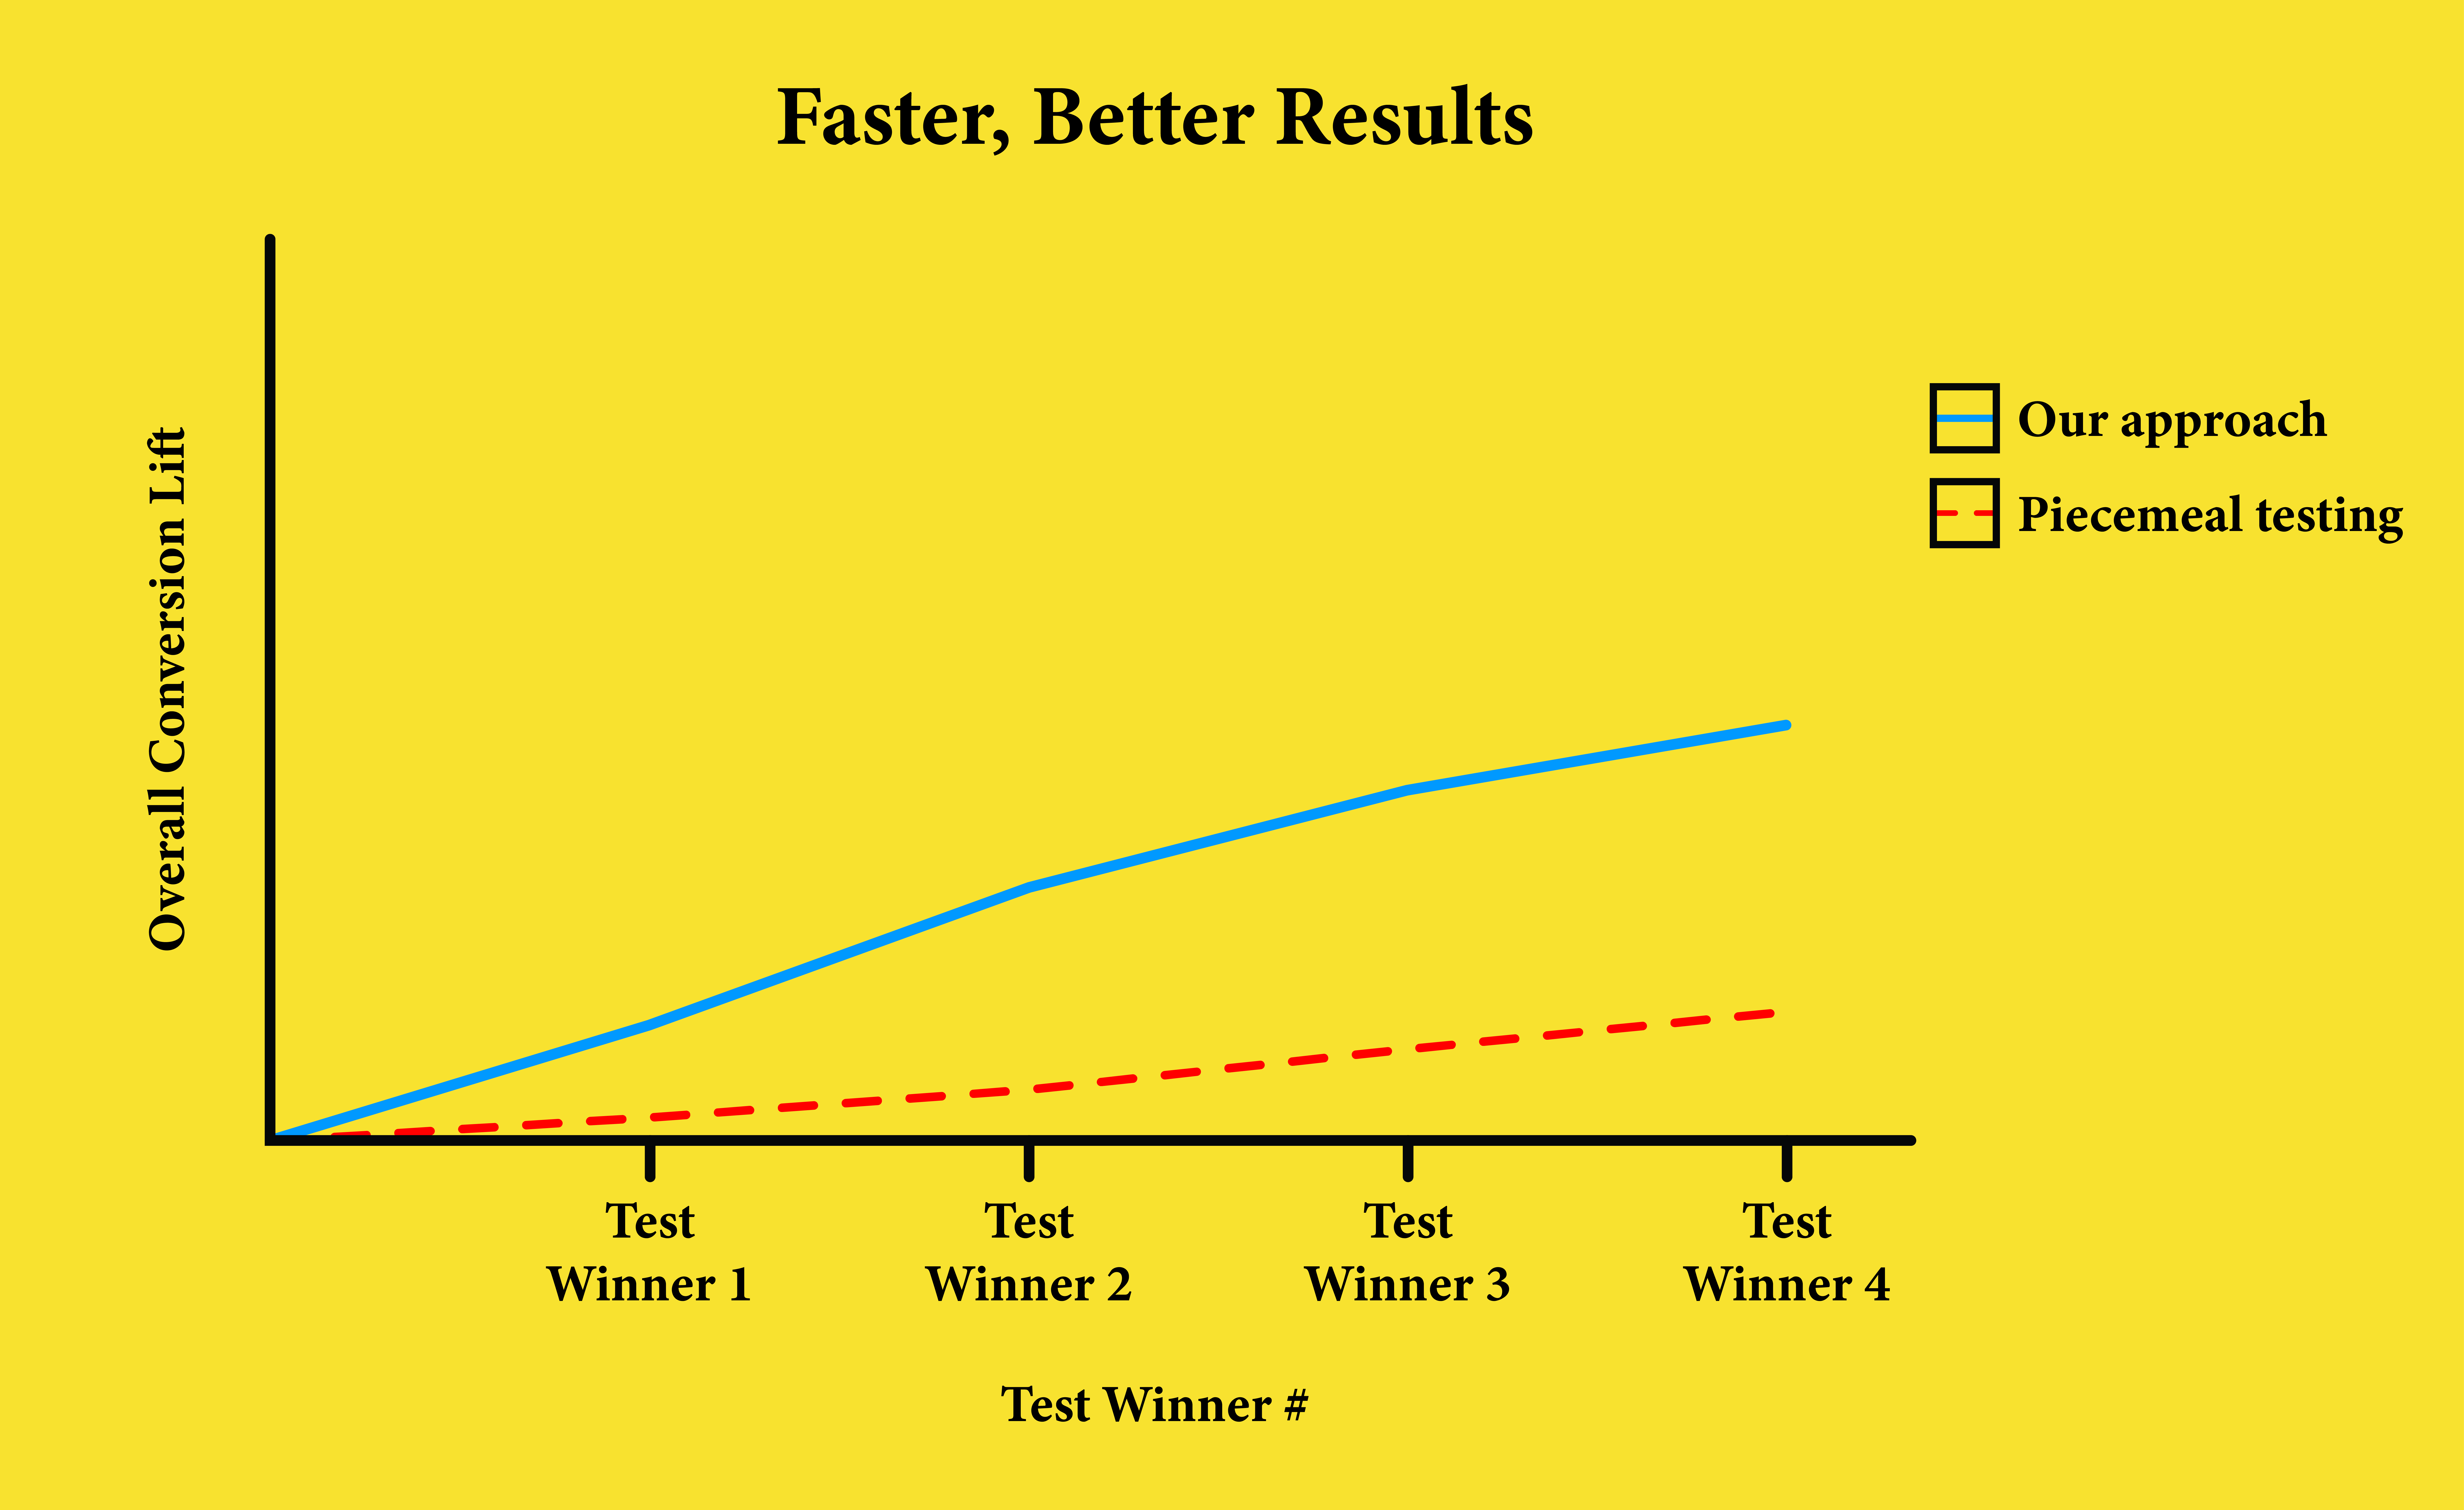 Achieve faster, better conversion rate lifts with this A/B testing approach.